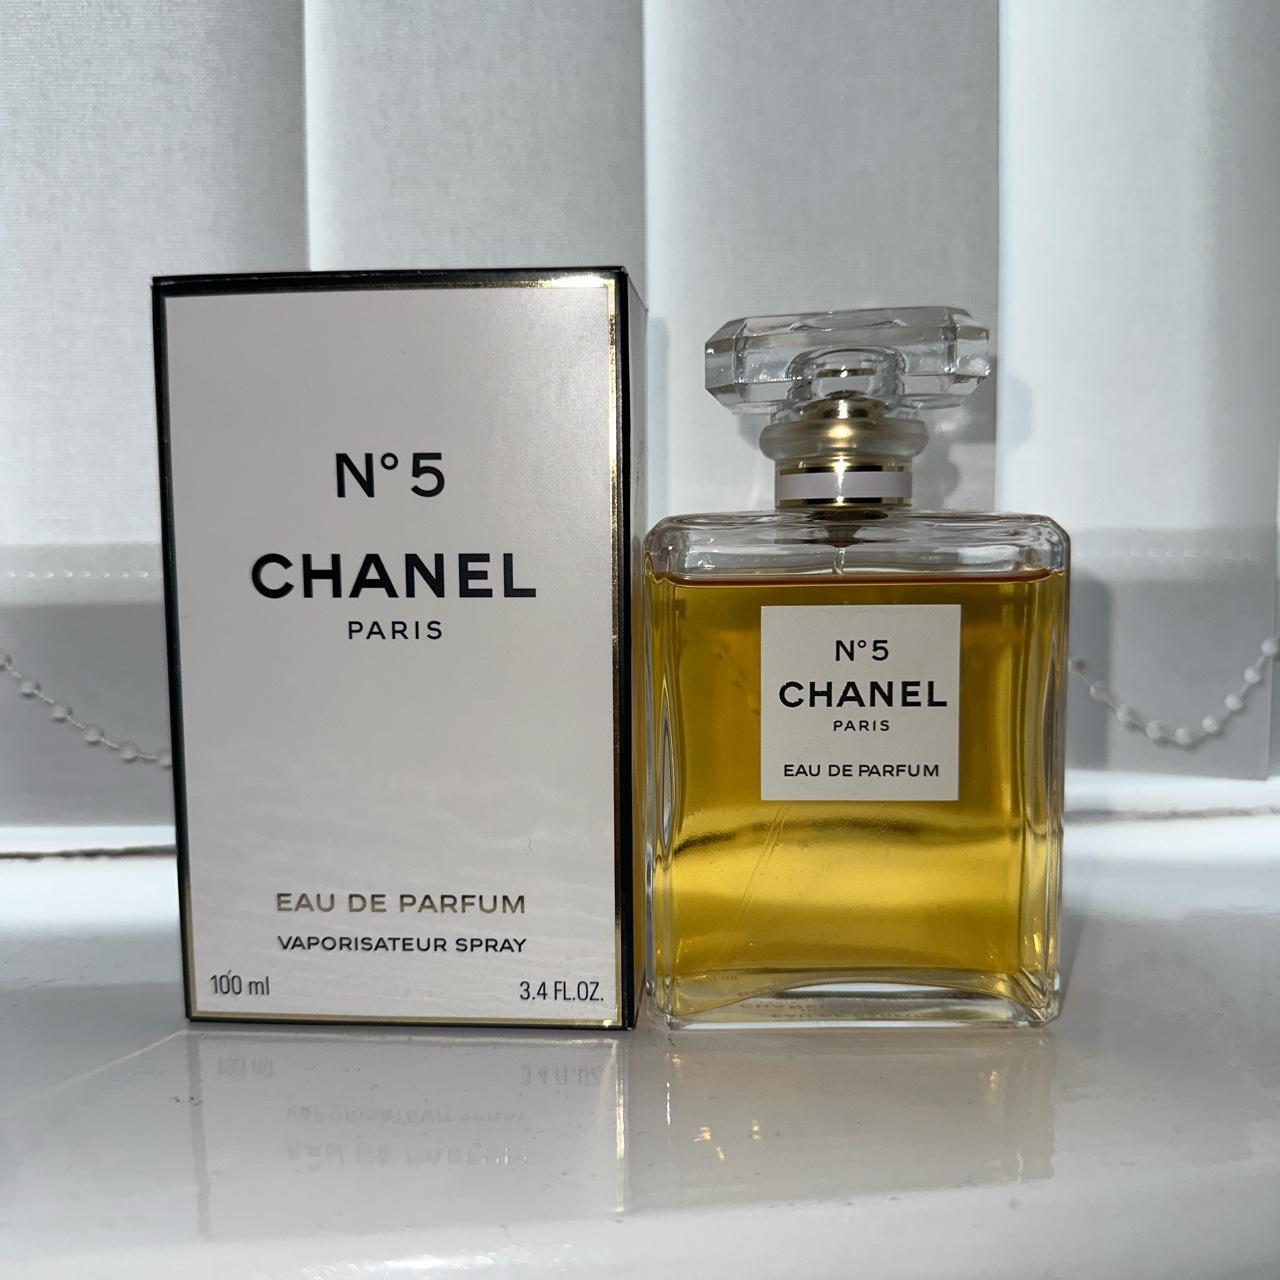 Chanel no 5 perfume plus 2 refills. There are 3 x - Depop